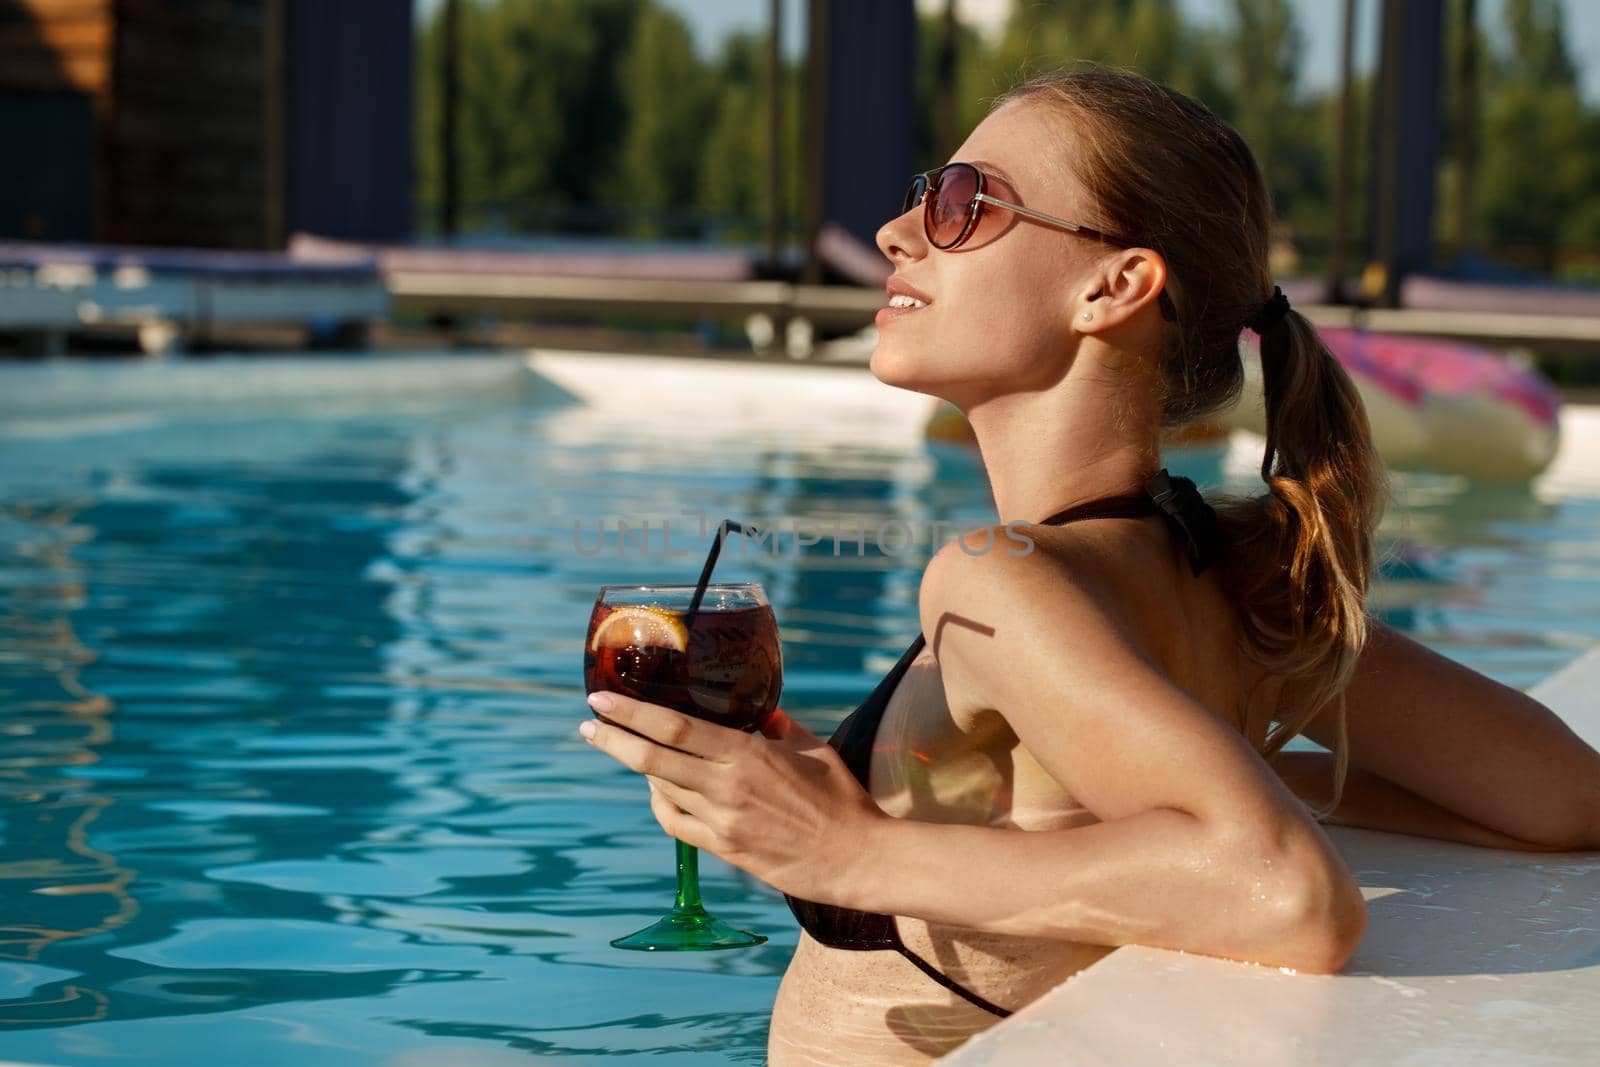 Stunning beautiful young woman enjoyoing sunbathing in the pool with a drink in her hand, copy space. Cheerful attractive woman having cocktail at the poolside. Relation, lifestyle, summertime concept